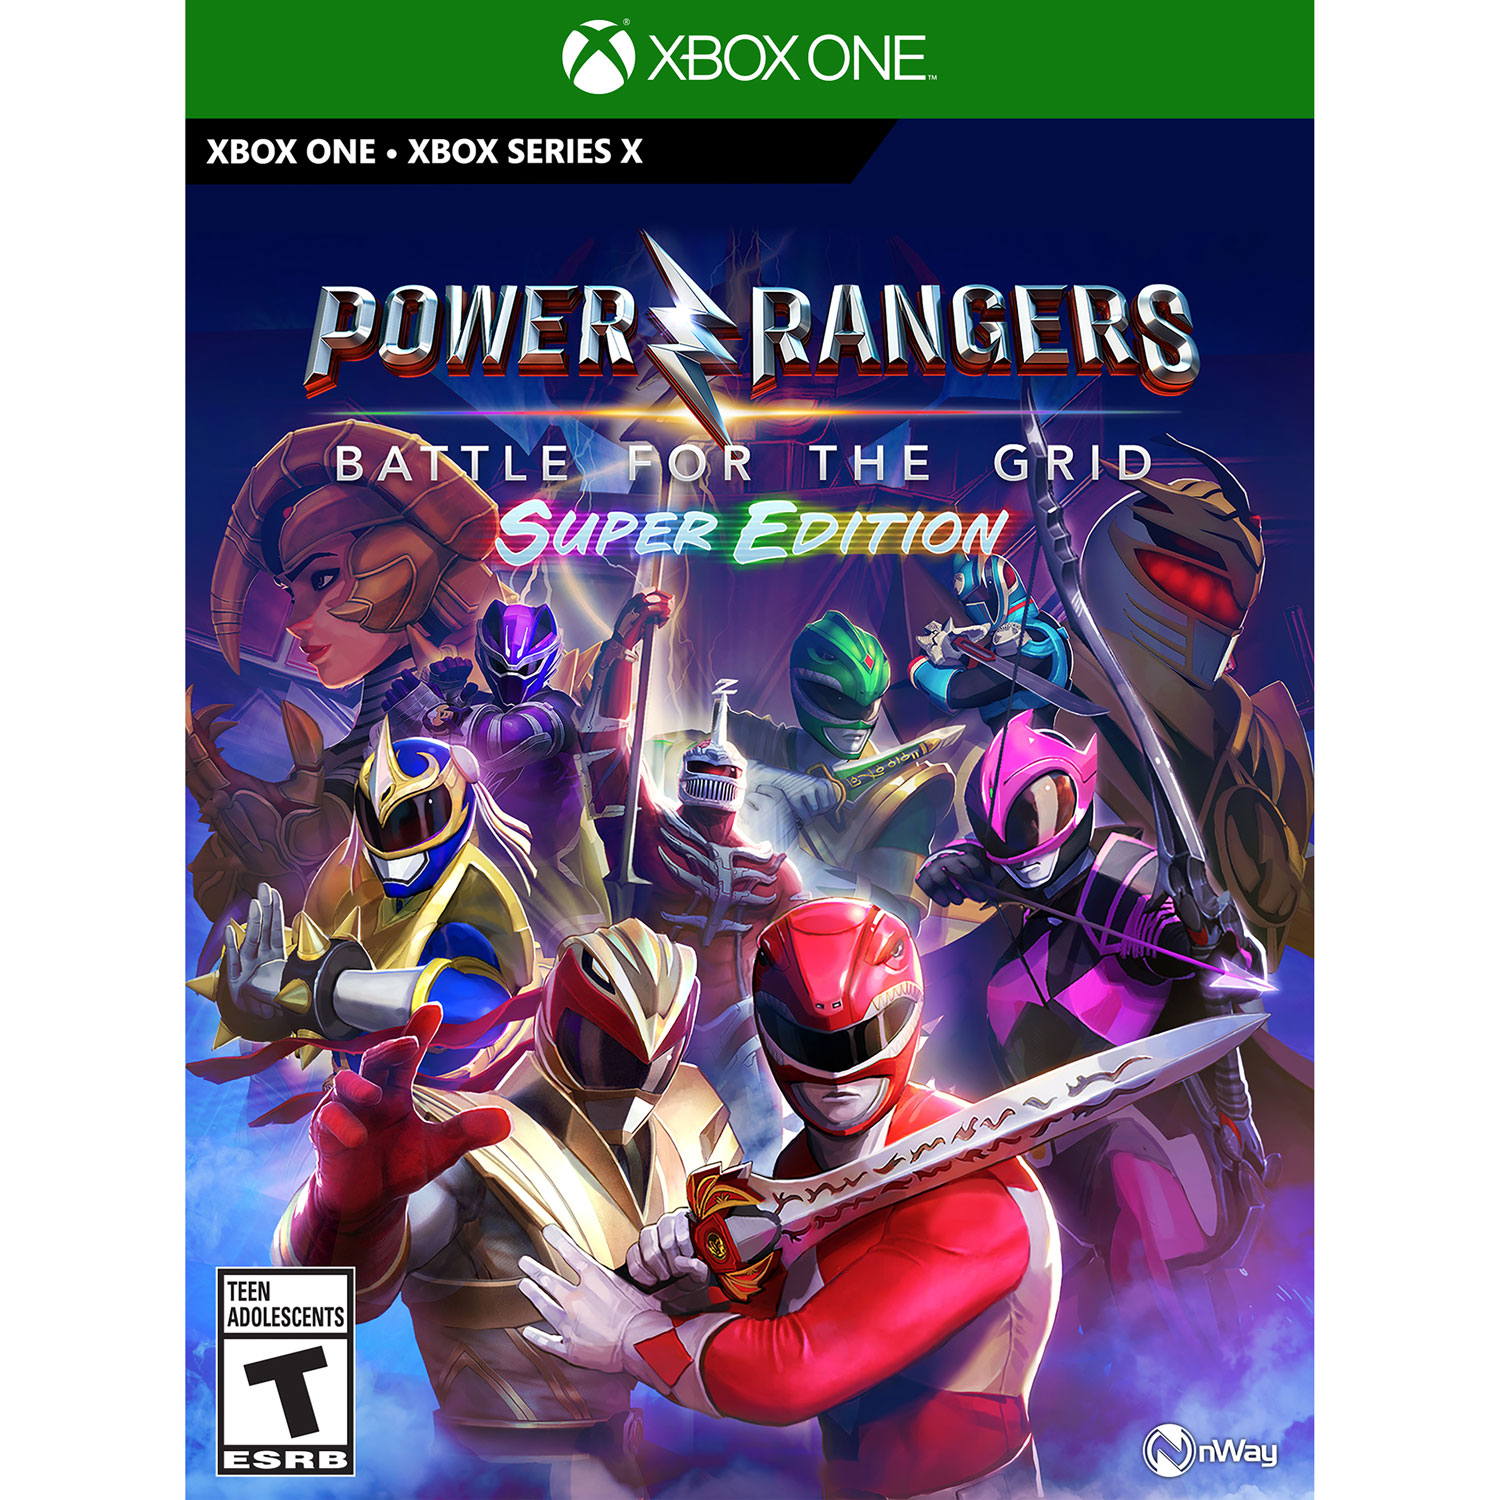 Power Rangers: Battle for the Grid Super Edition (Xbox One / Xbox Series X)